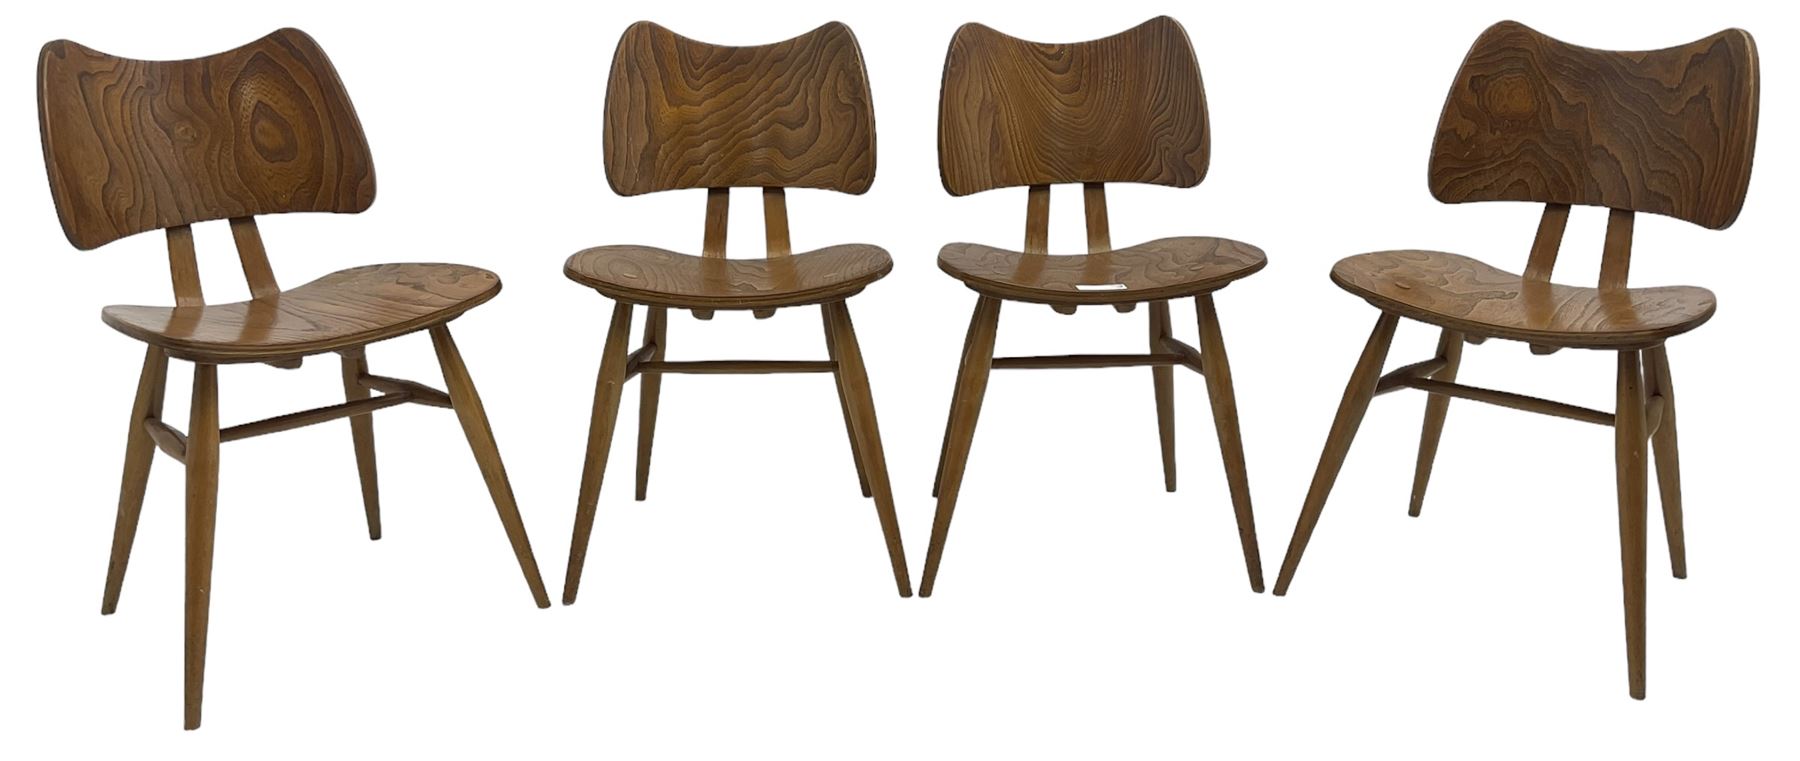 Lucian Ercolani - set of four ercol elm and beech model '401' dining chairs - Image 22 of 42